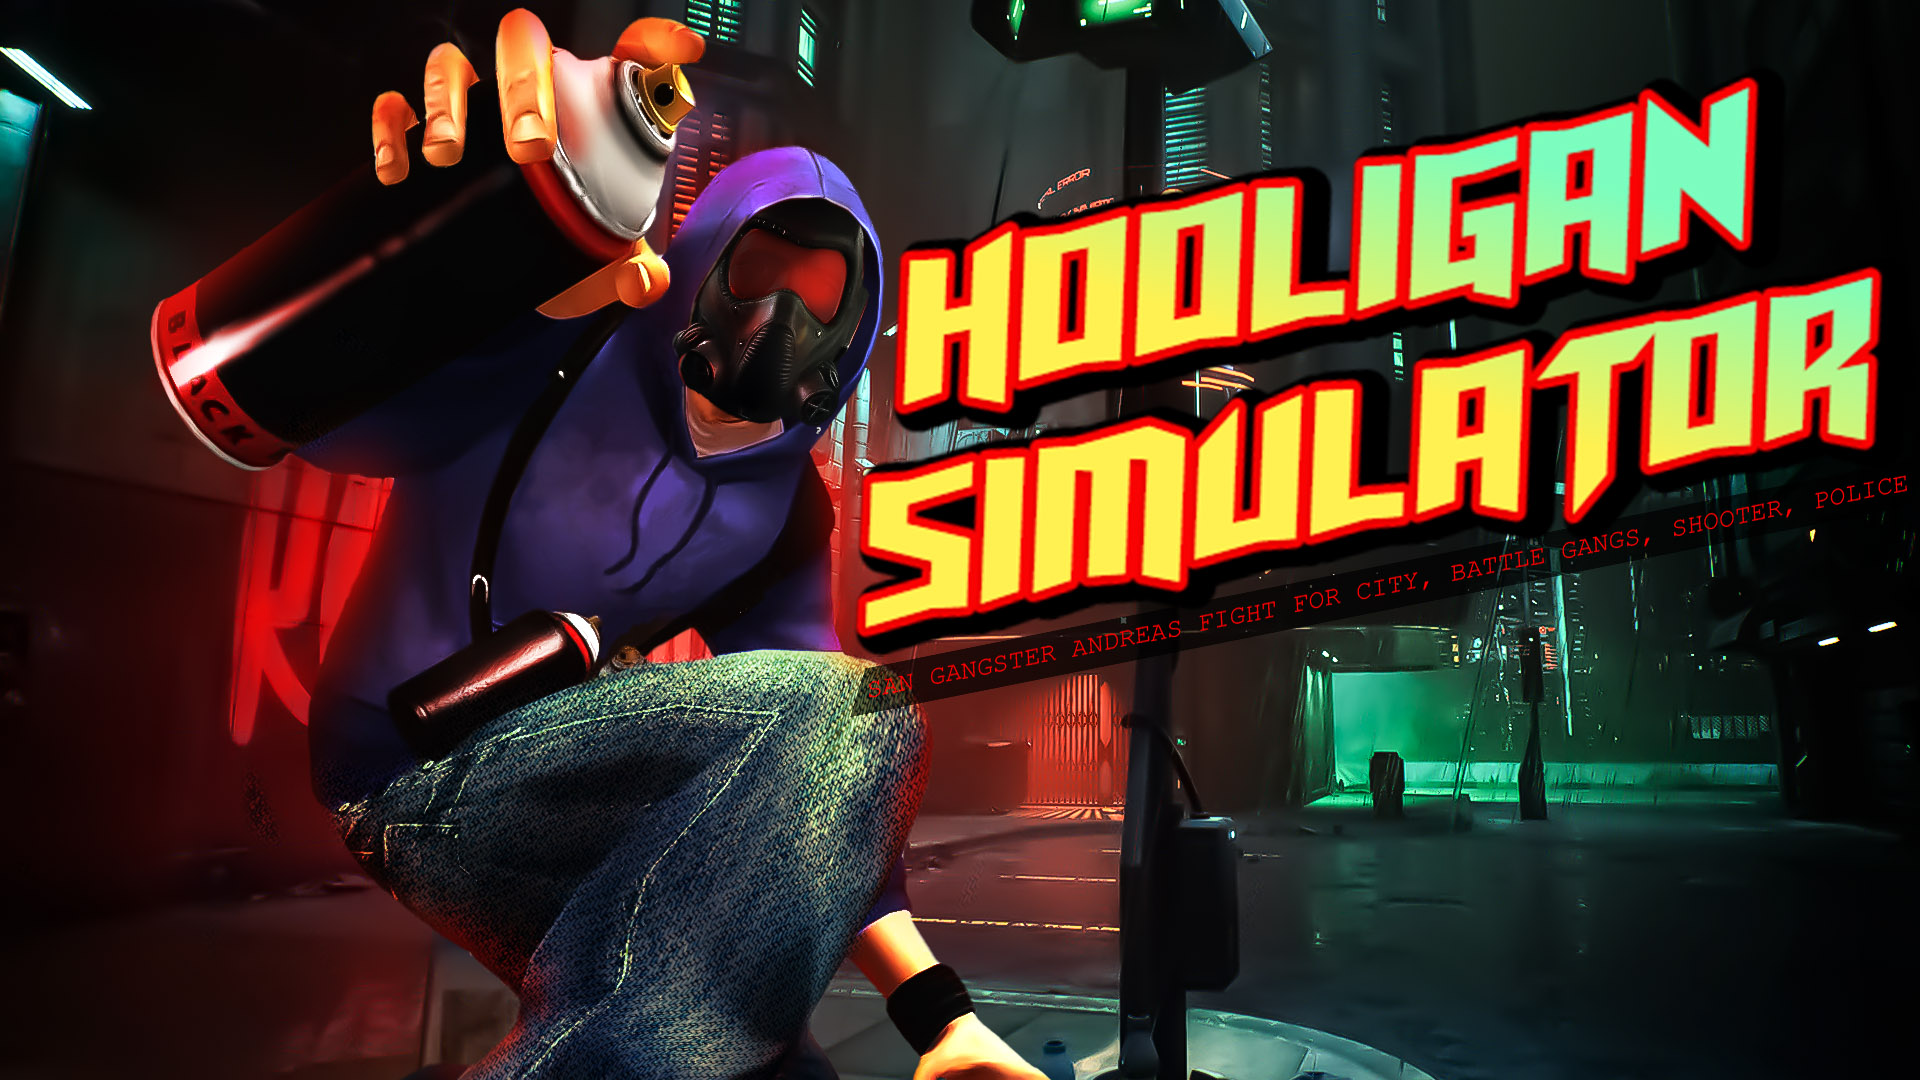 Hooligan Simulator - San Gangster Andreas Fight for City, Battle Gangs, Shooter, Police